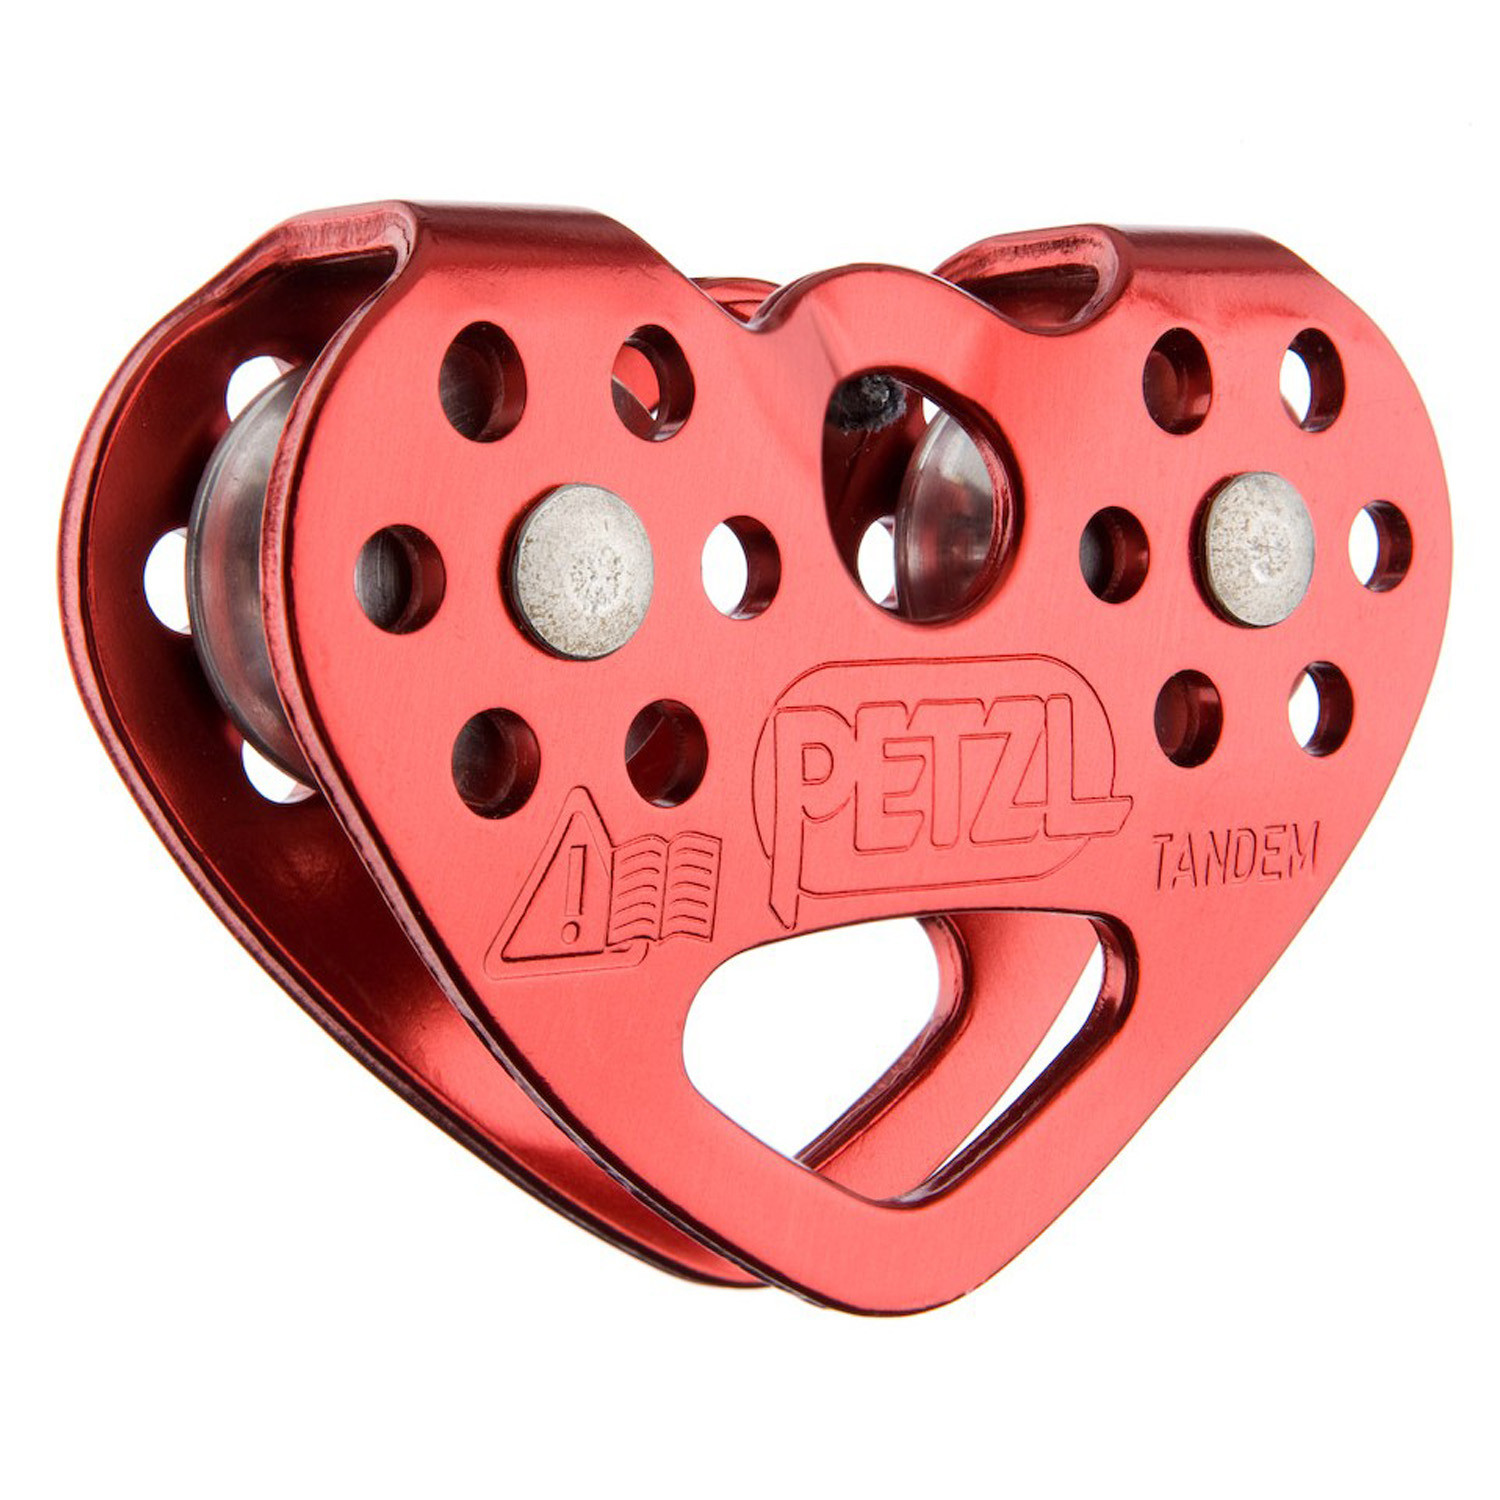 Petzl Tandem Double Pulley for Travel Along Ropes, Zipline Trolley